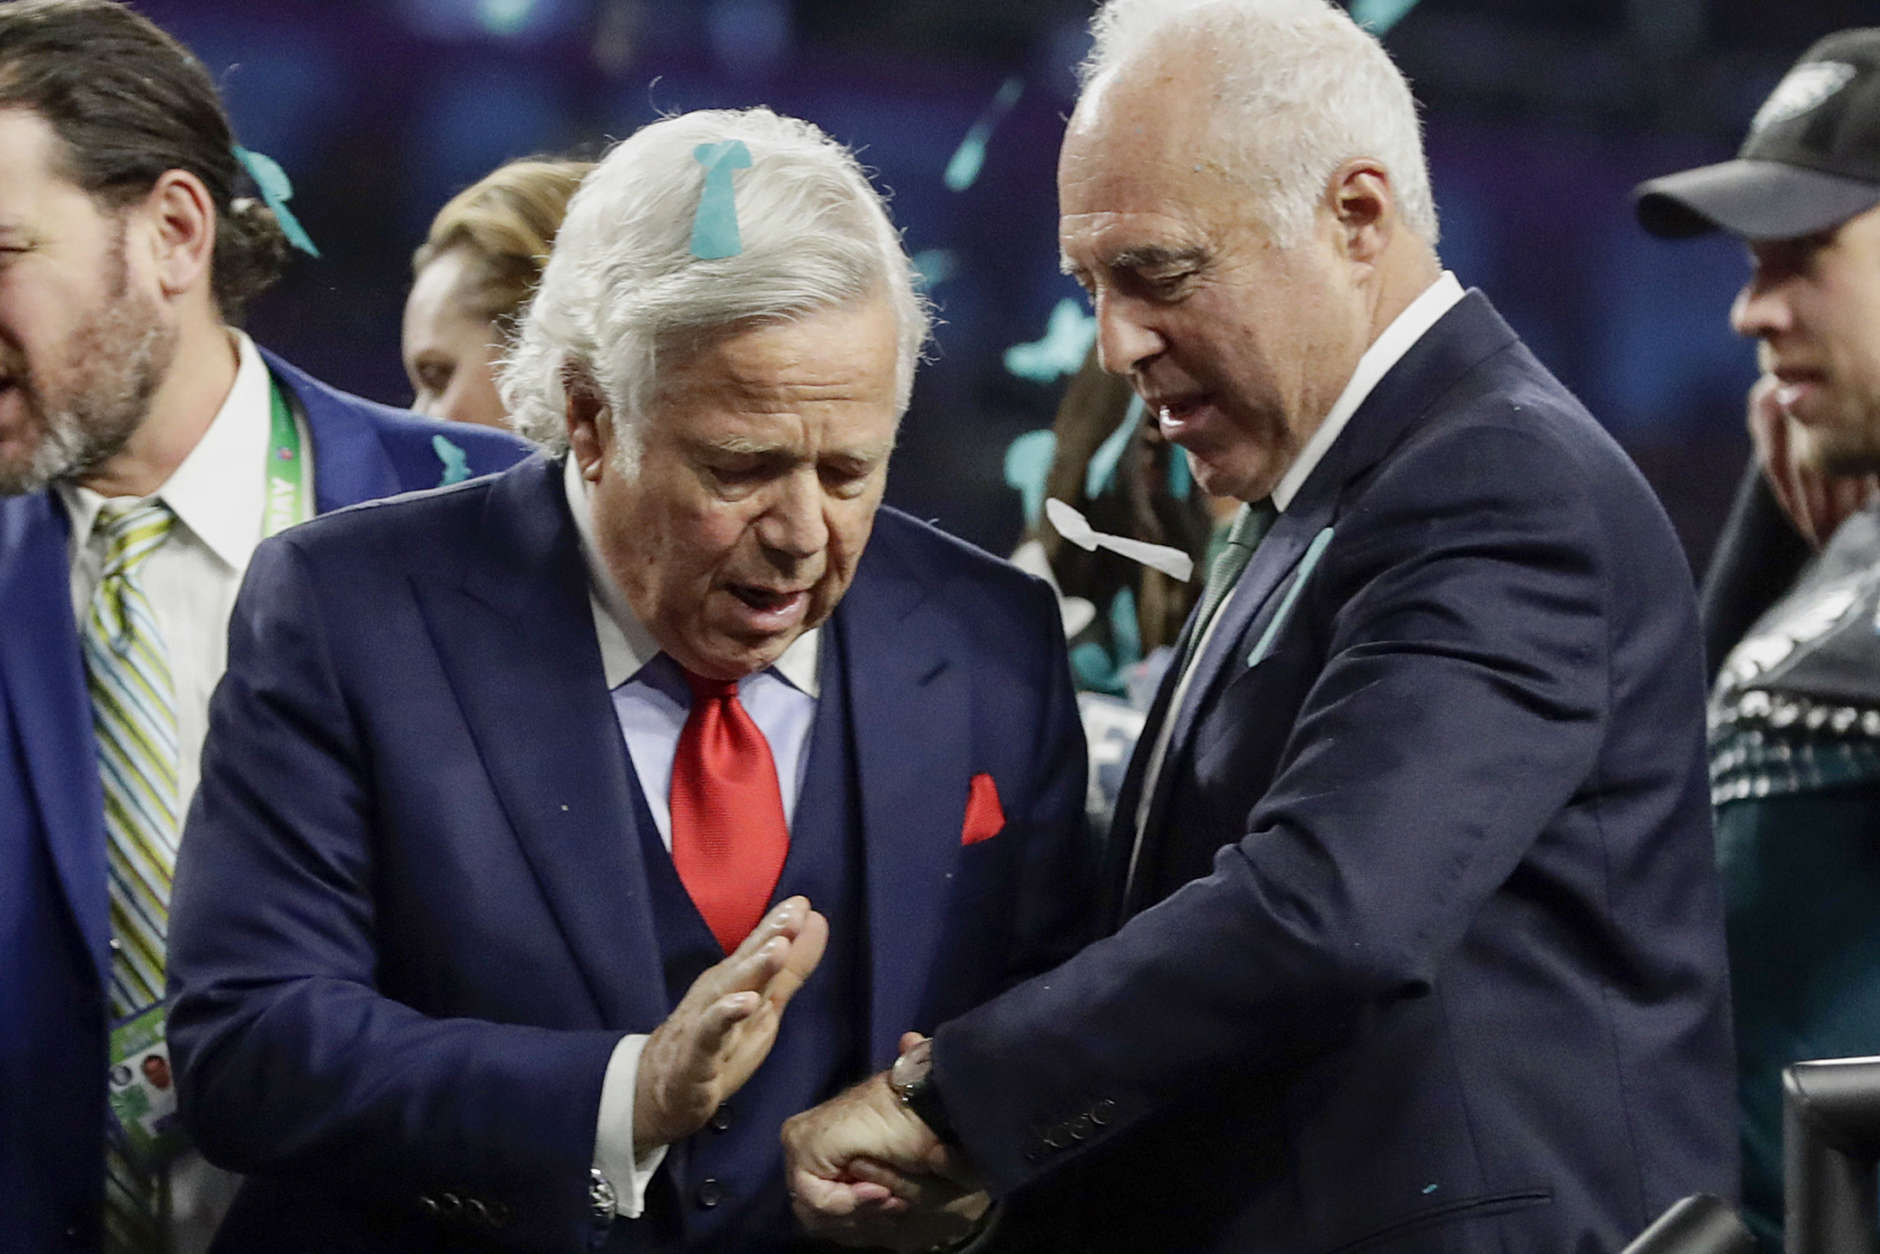 New England Patriots owner Robert Kraft, left, congratulates Philadelphia Eagles owner Jeffrey Lurie, after the Eagles won the NFL Super Bowl 52 football game against the New England Patriots, Sunday, Feb. 4, 2018, in Minneapolis. The Eagles won 41-33. (AP Photo/Frank Franklin II)